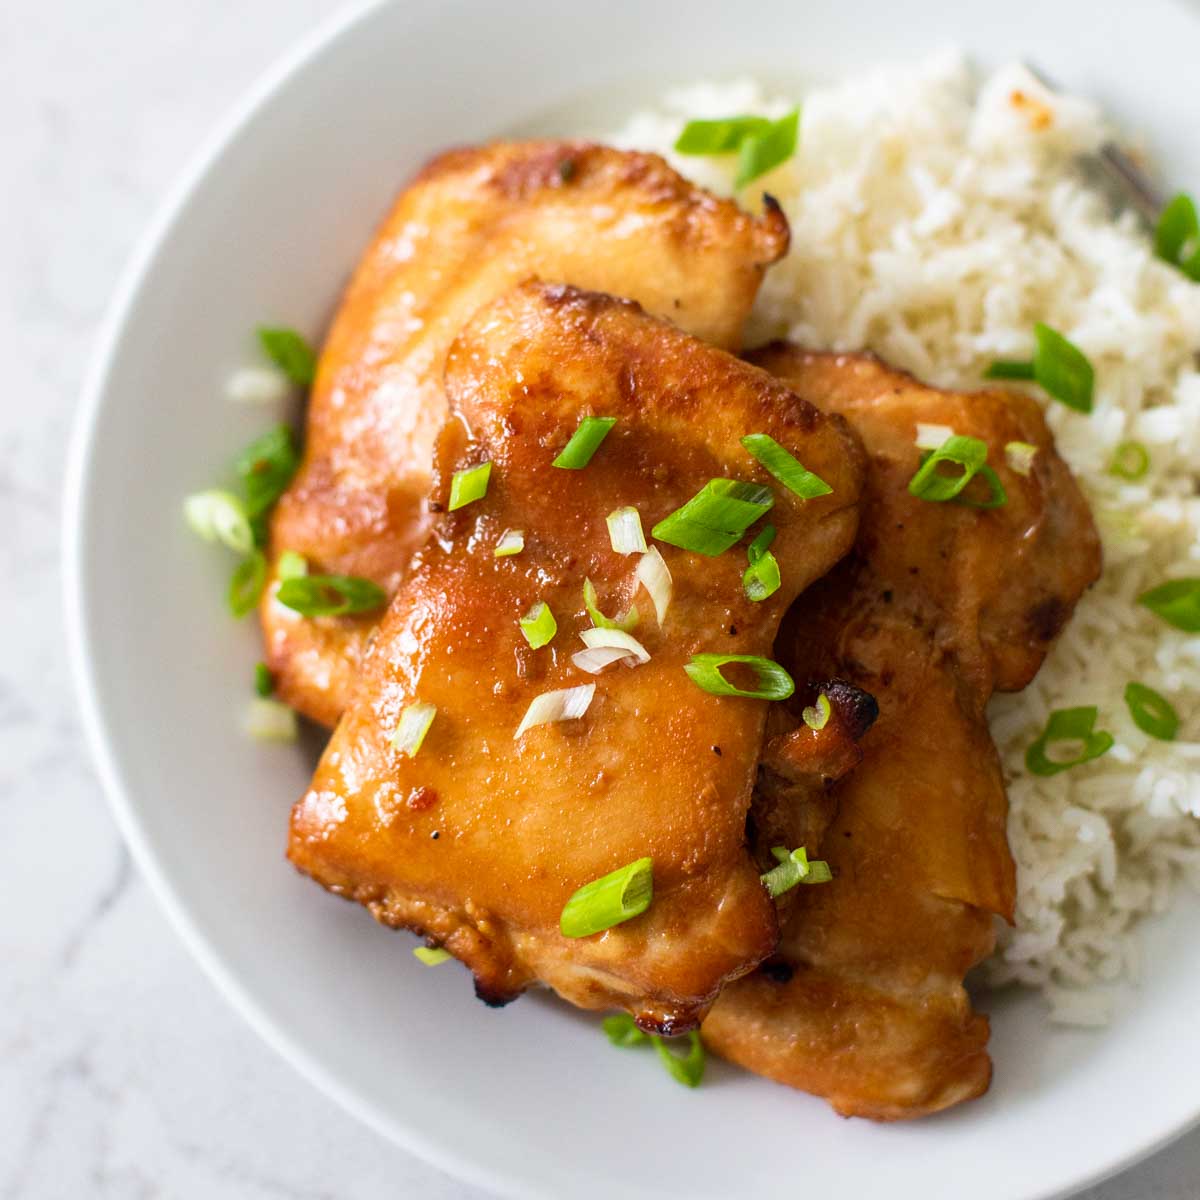 A white plate has jasmine rice and a pile of honey garlic chicken thighs sprinkled with fresh green onions.